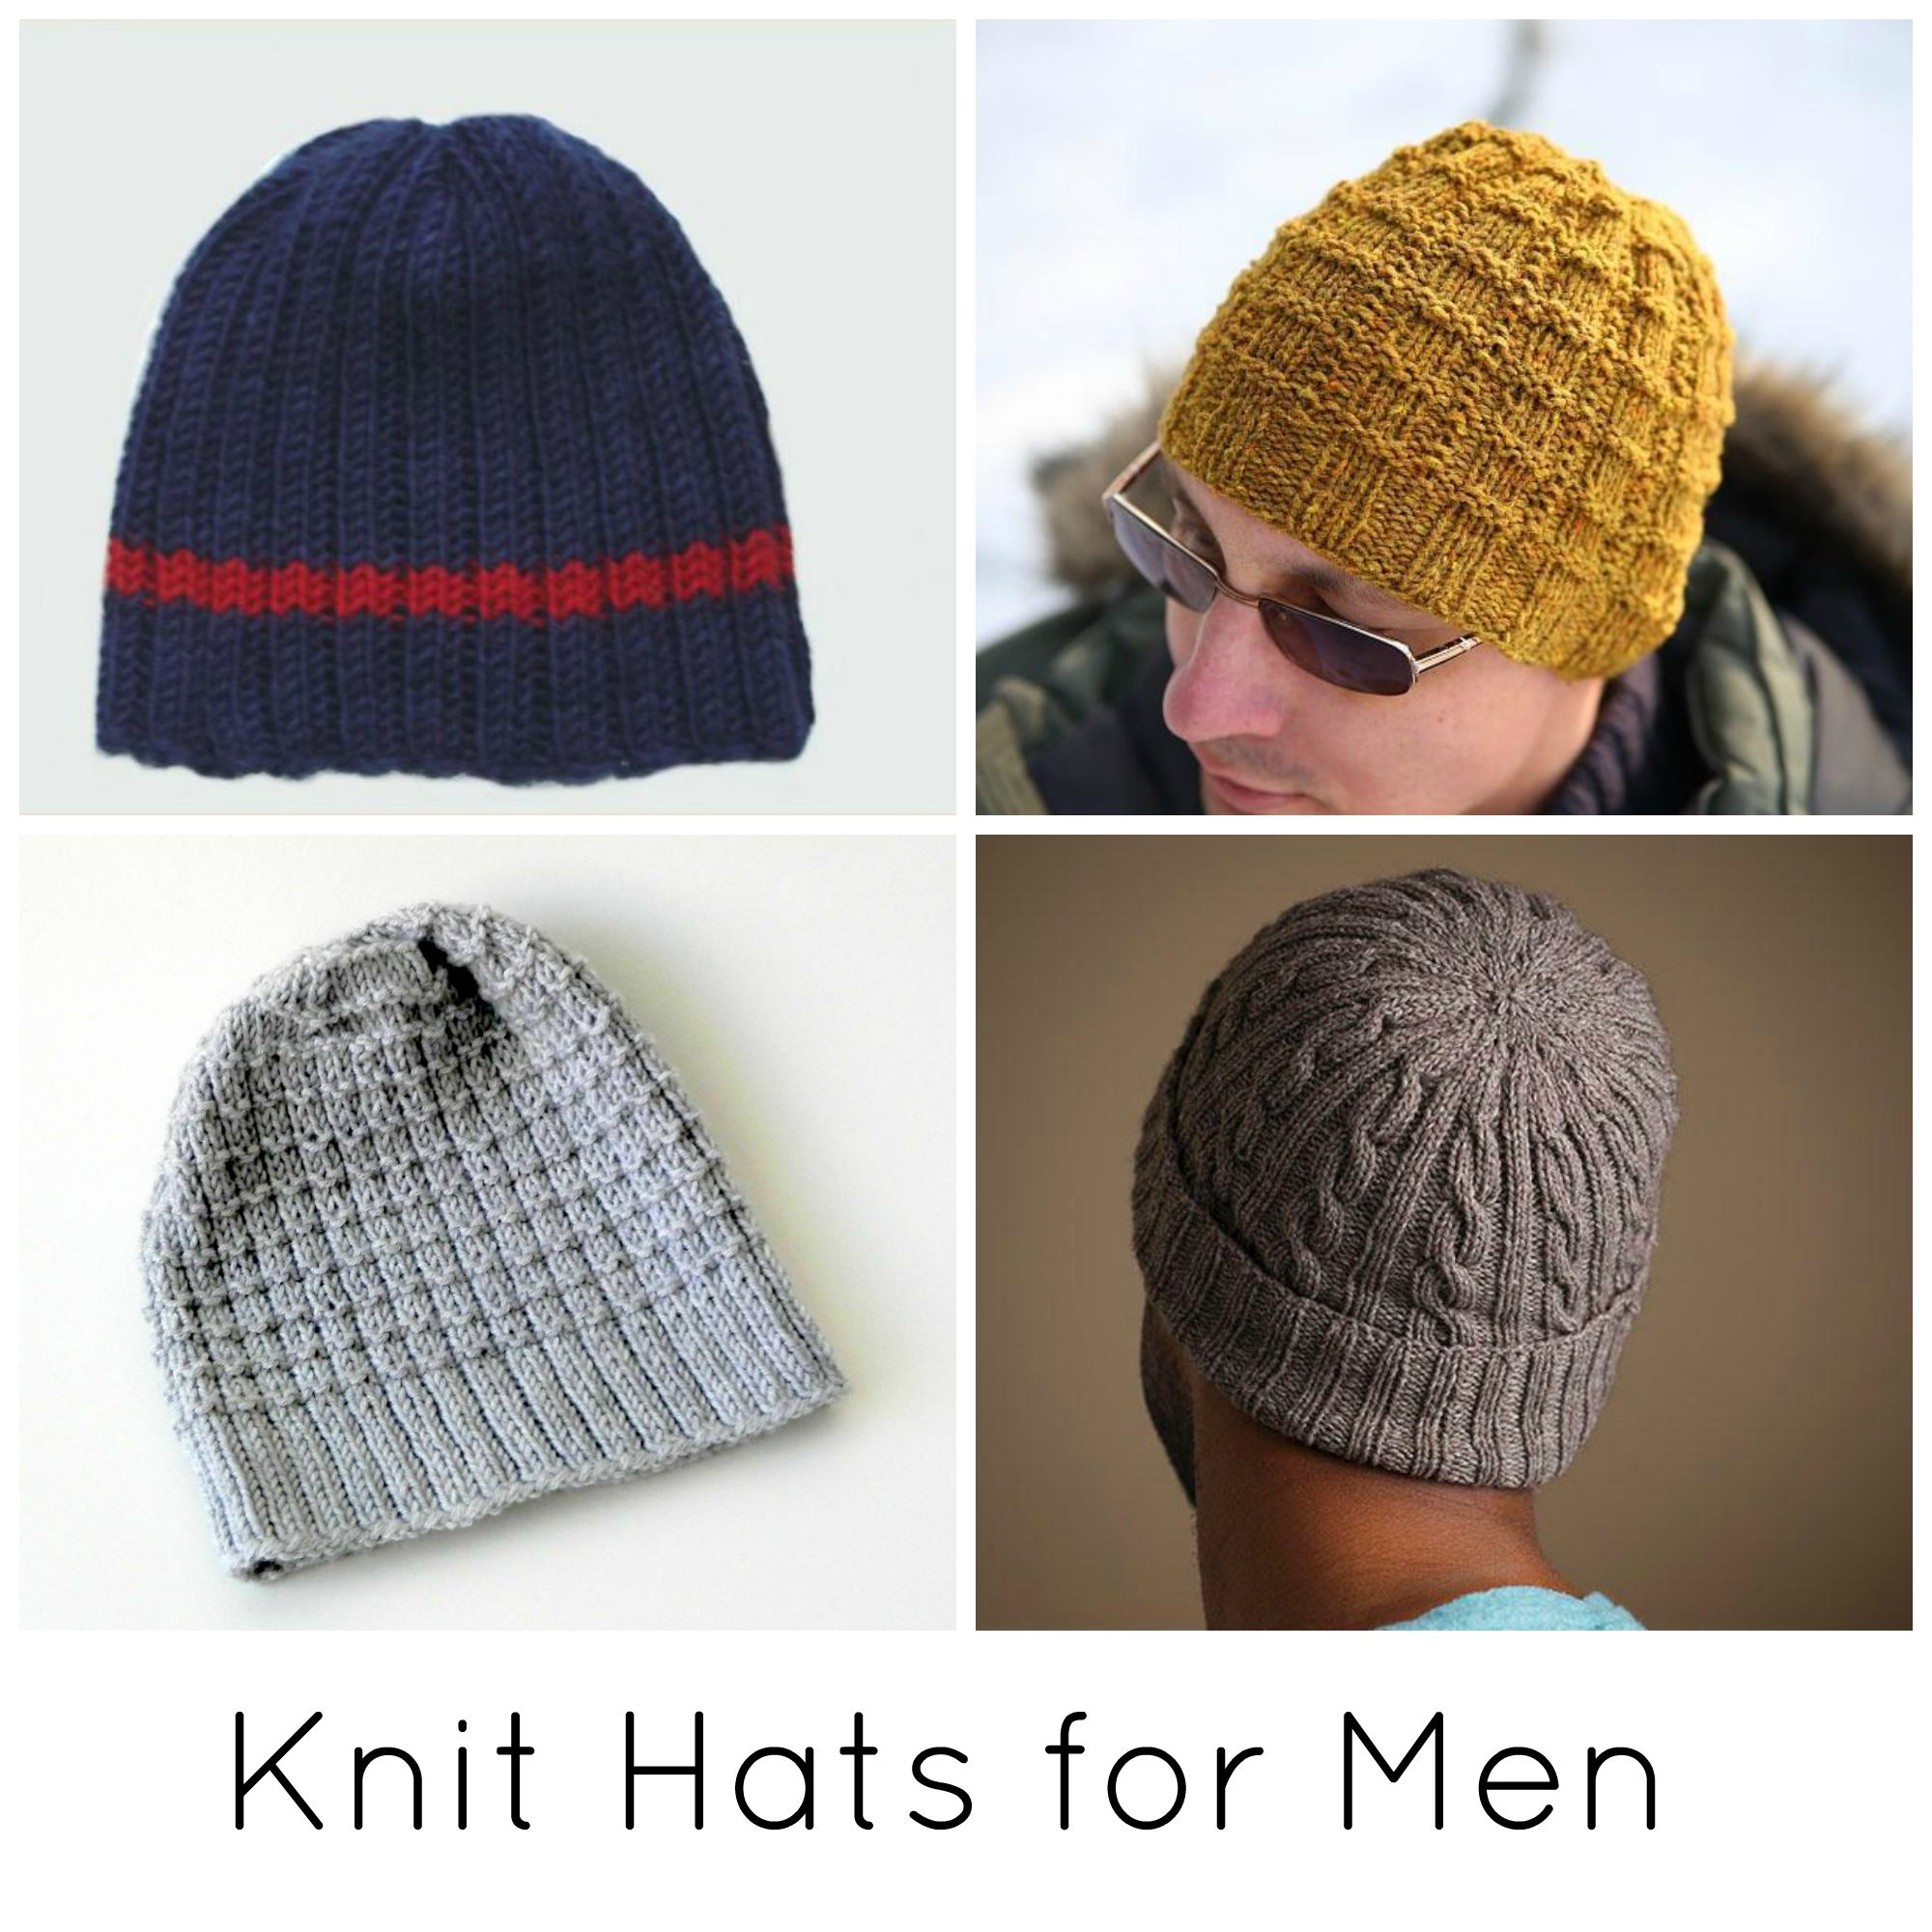 Knitted Mens Hat Patterns 8 Knit Hats For Men From Adventurous To Classic